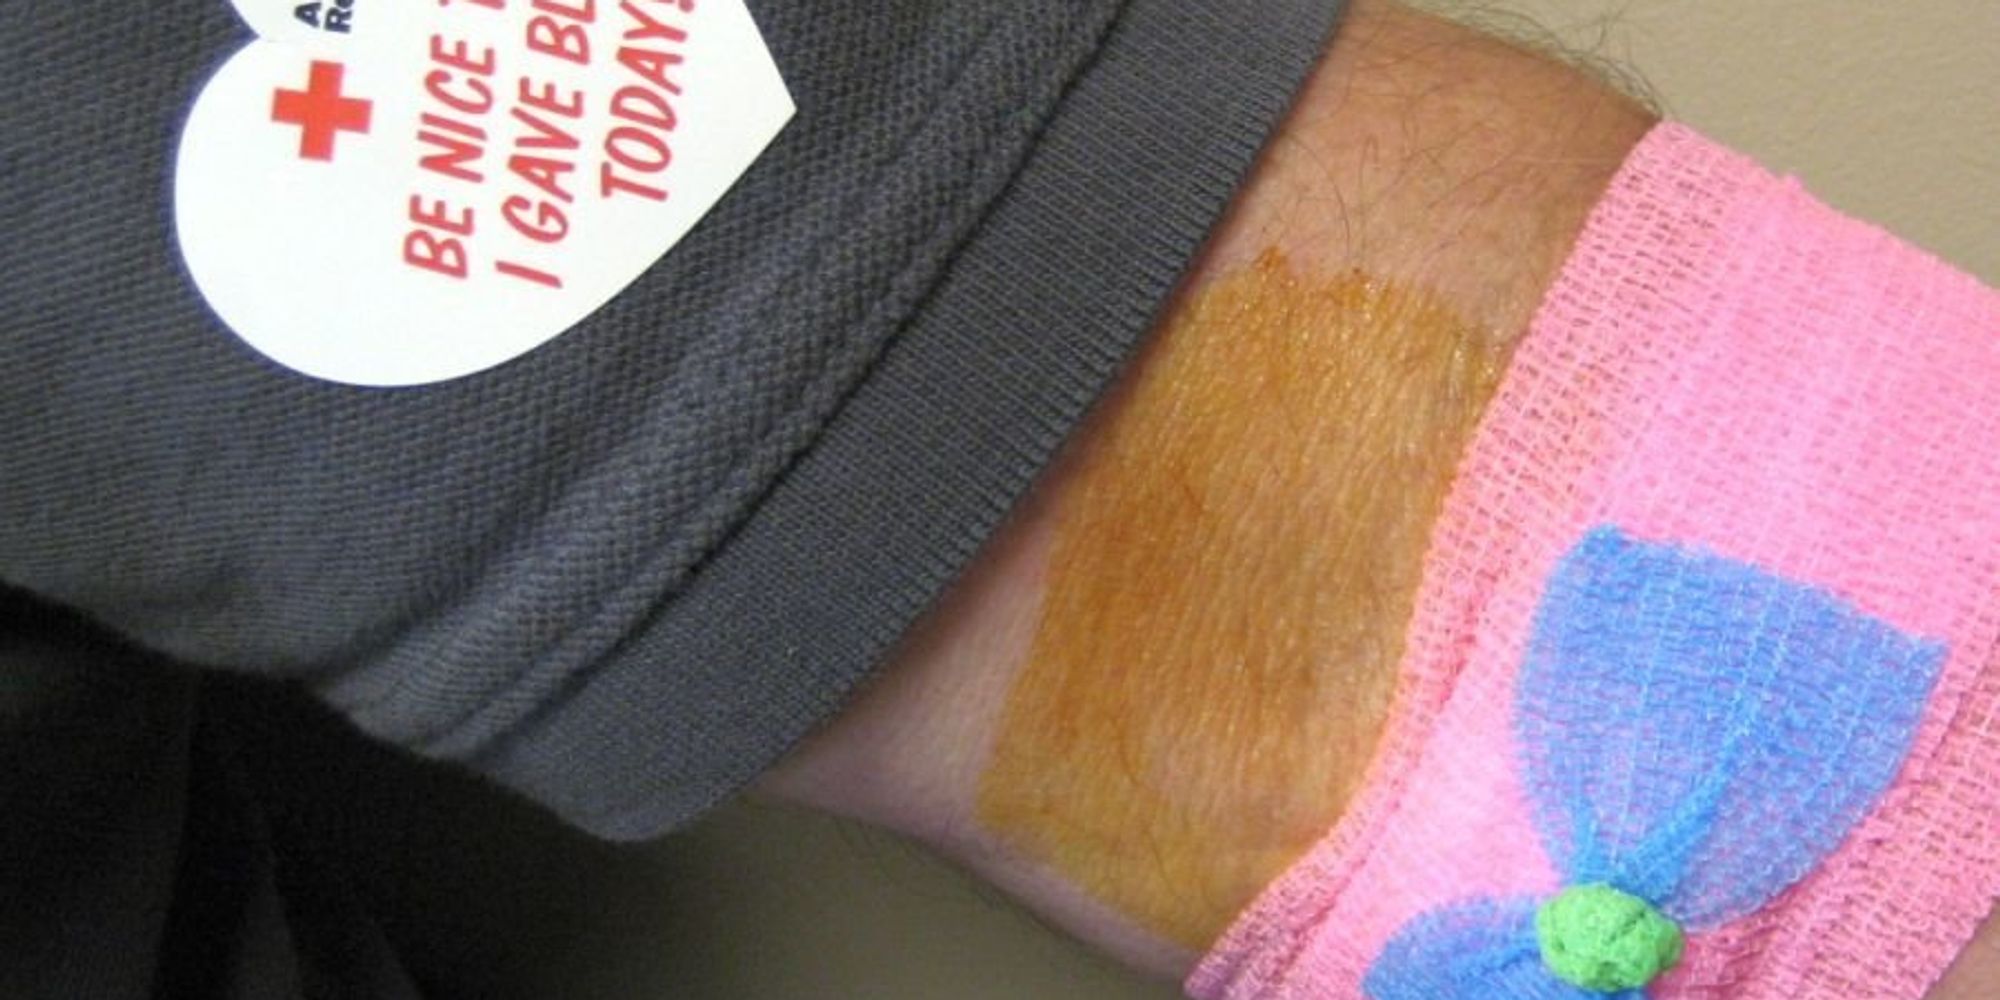 The FDA's Blood Donor Policy Is Still Homophobic